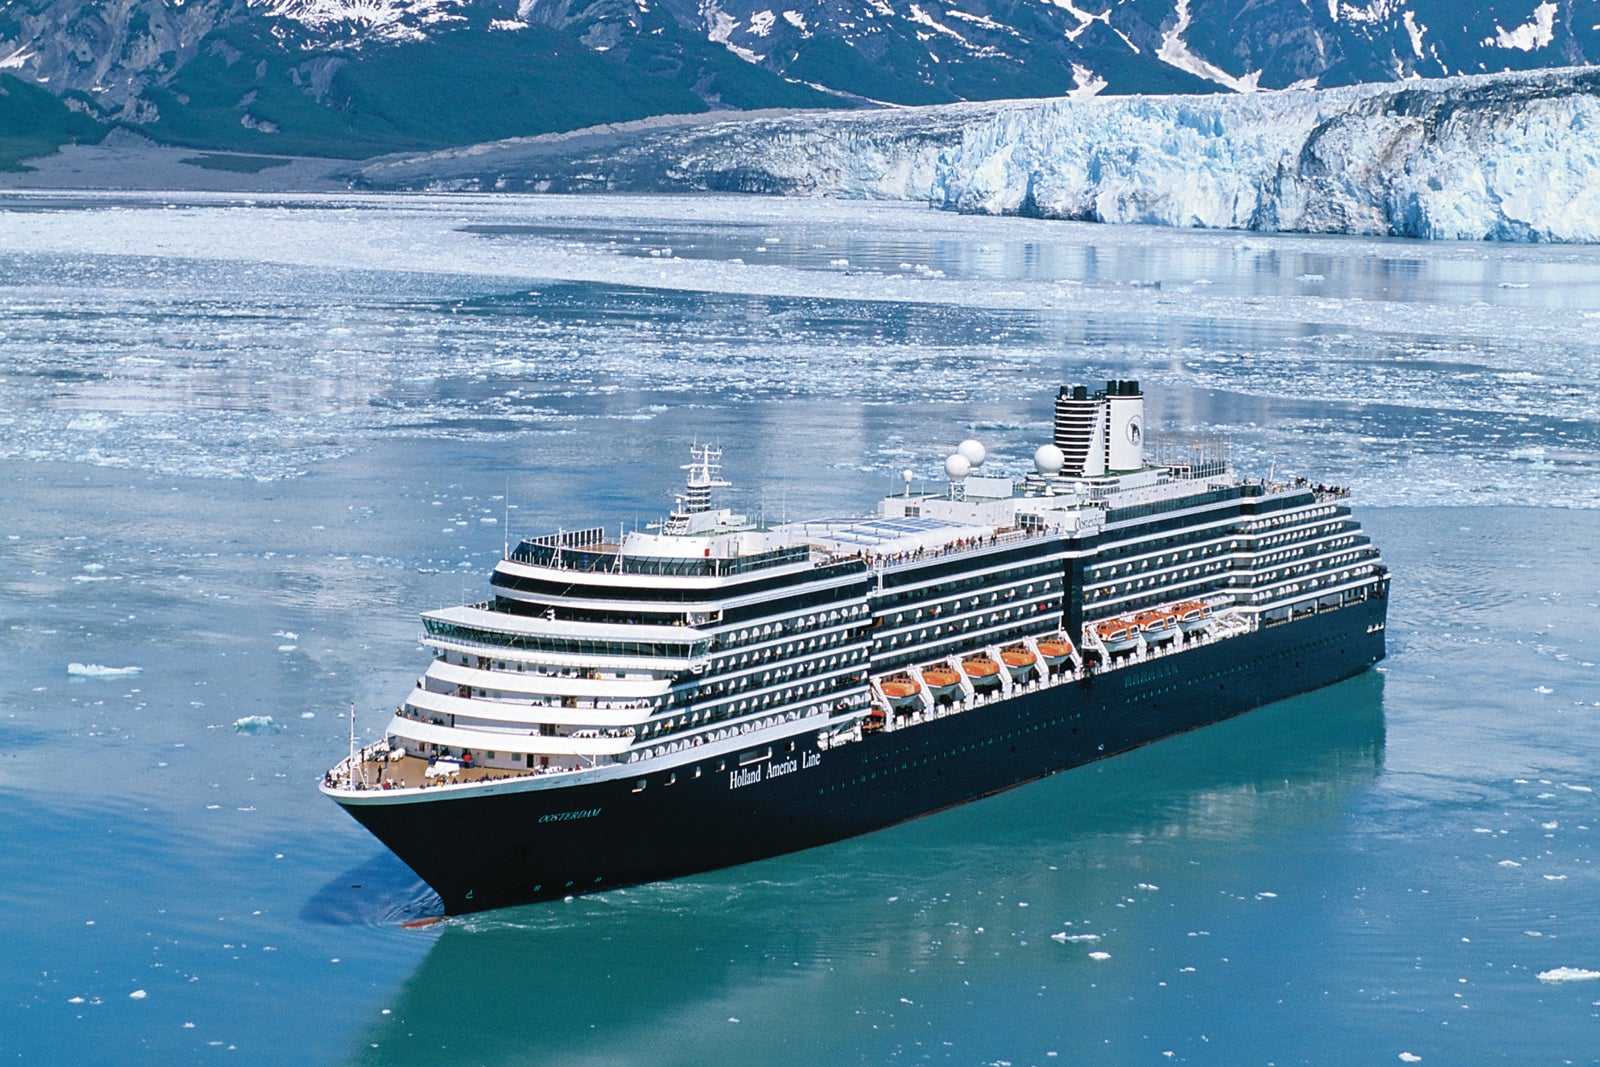 Cruise ship in icy waters with Hubbard Glacier behind